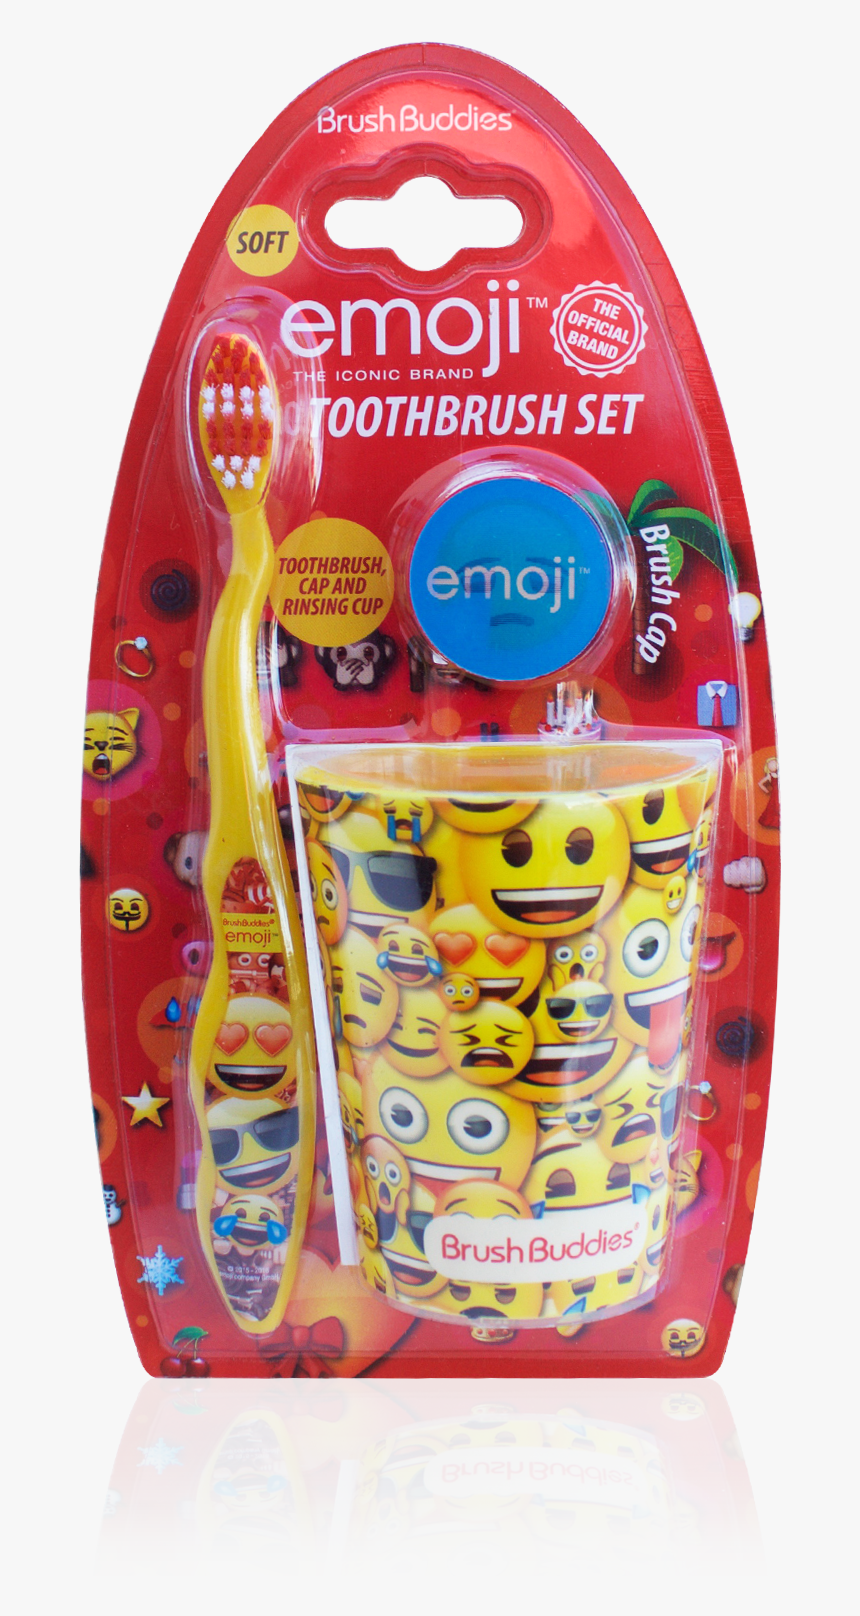 Load Image Into Gallery Viewer, Brush Buddies Emoji - Toy Instrument, HD Png Download, Free Download